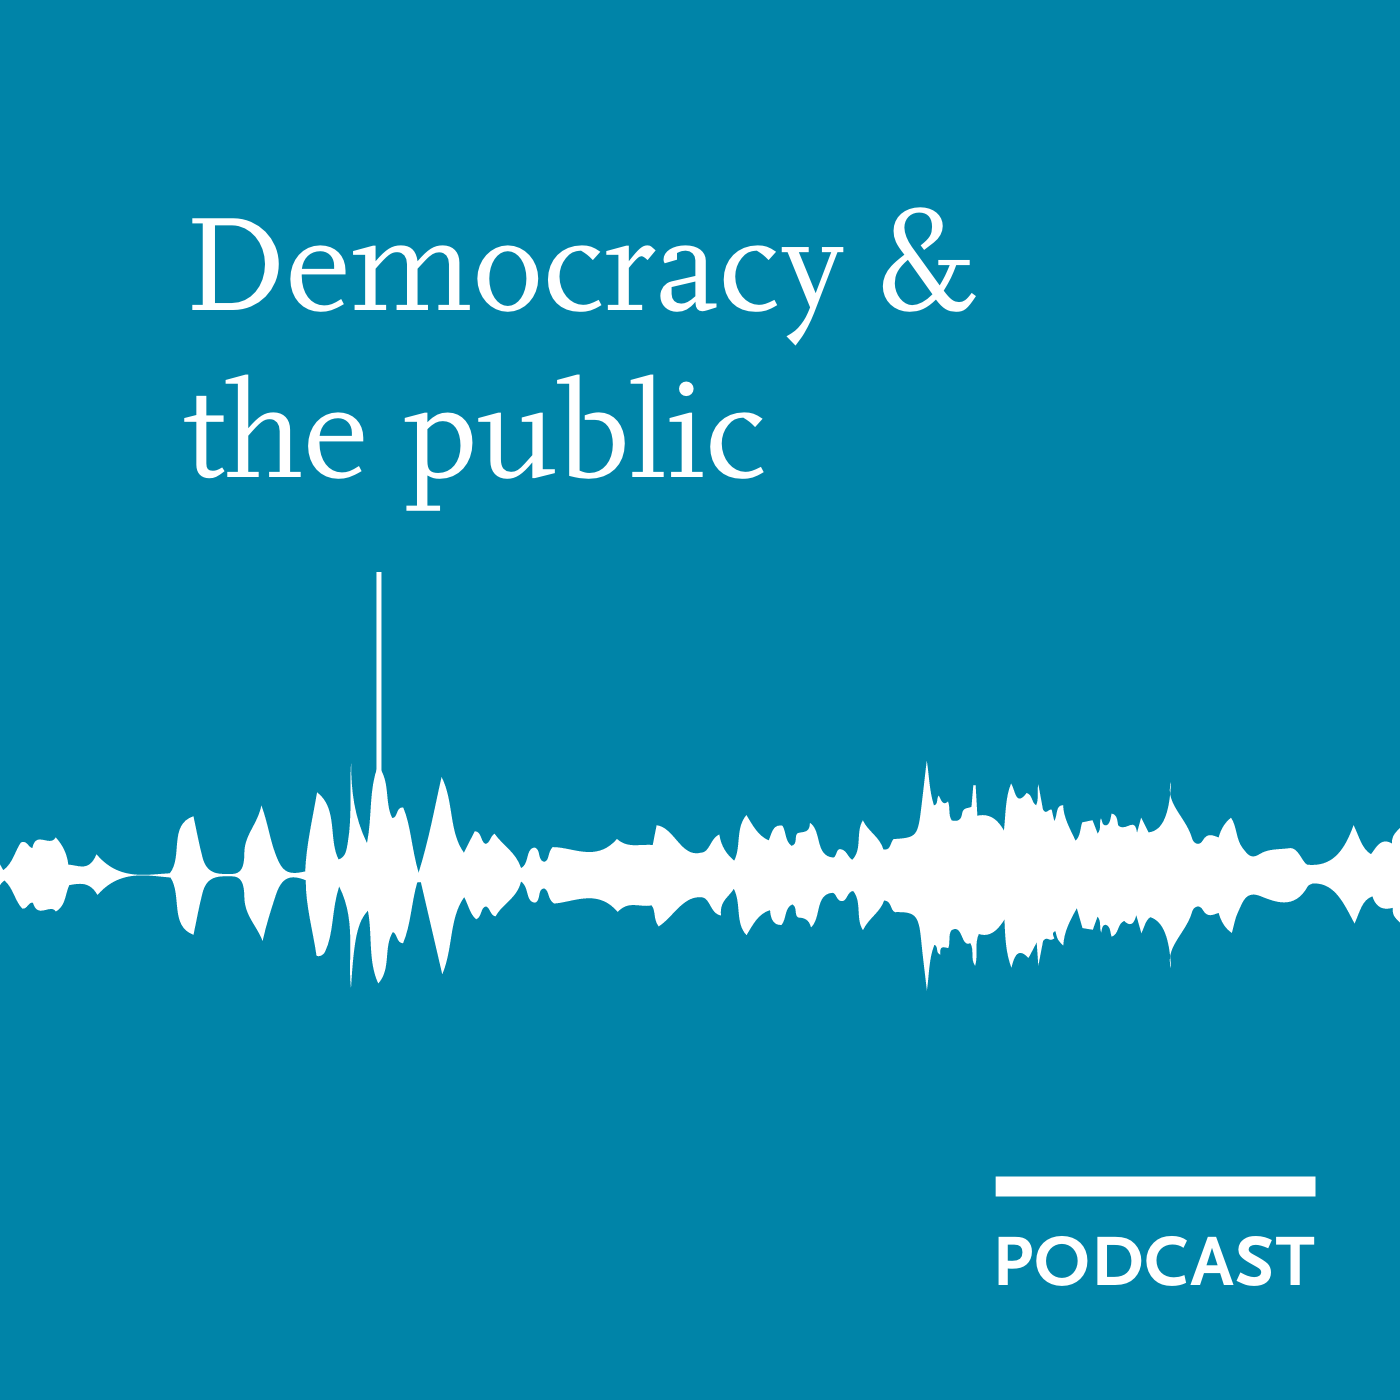 Democracy and the public